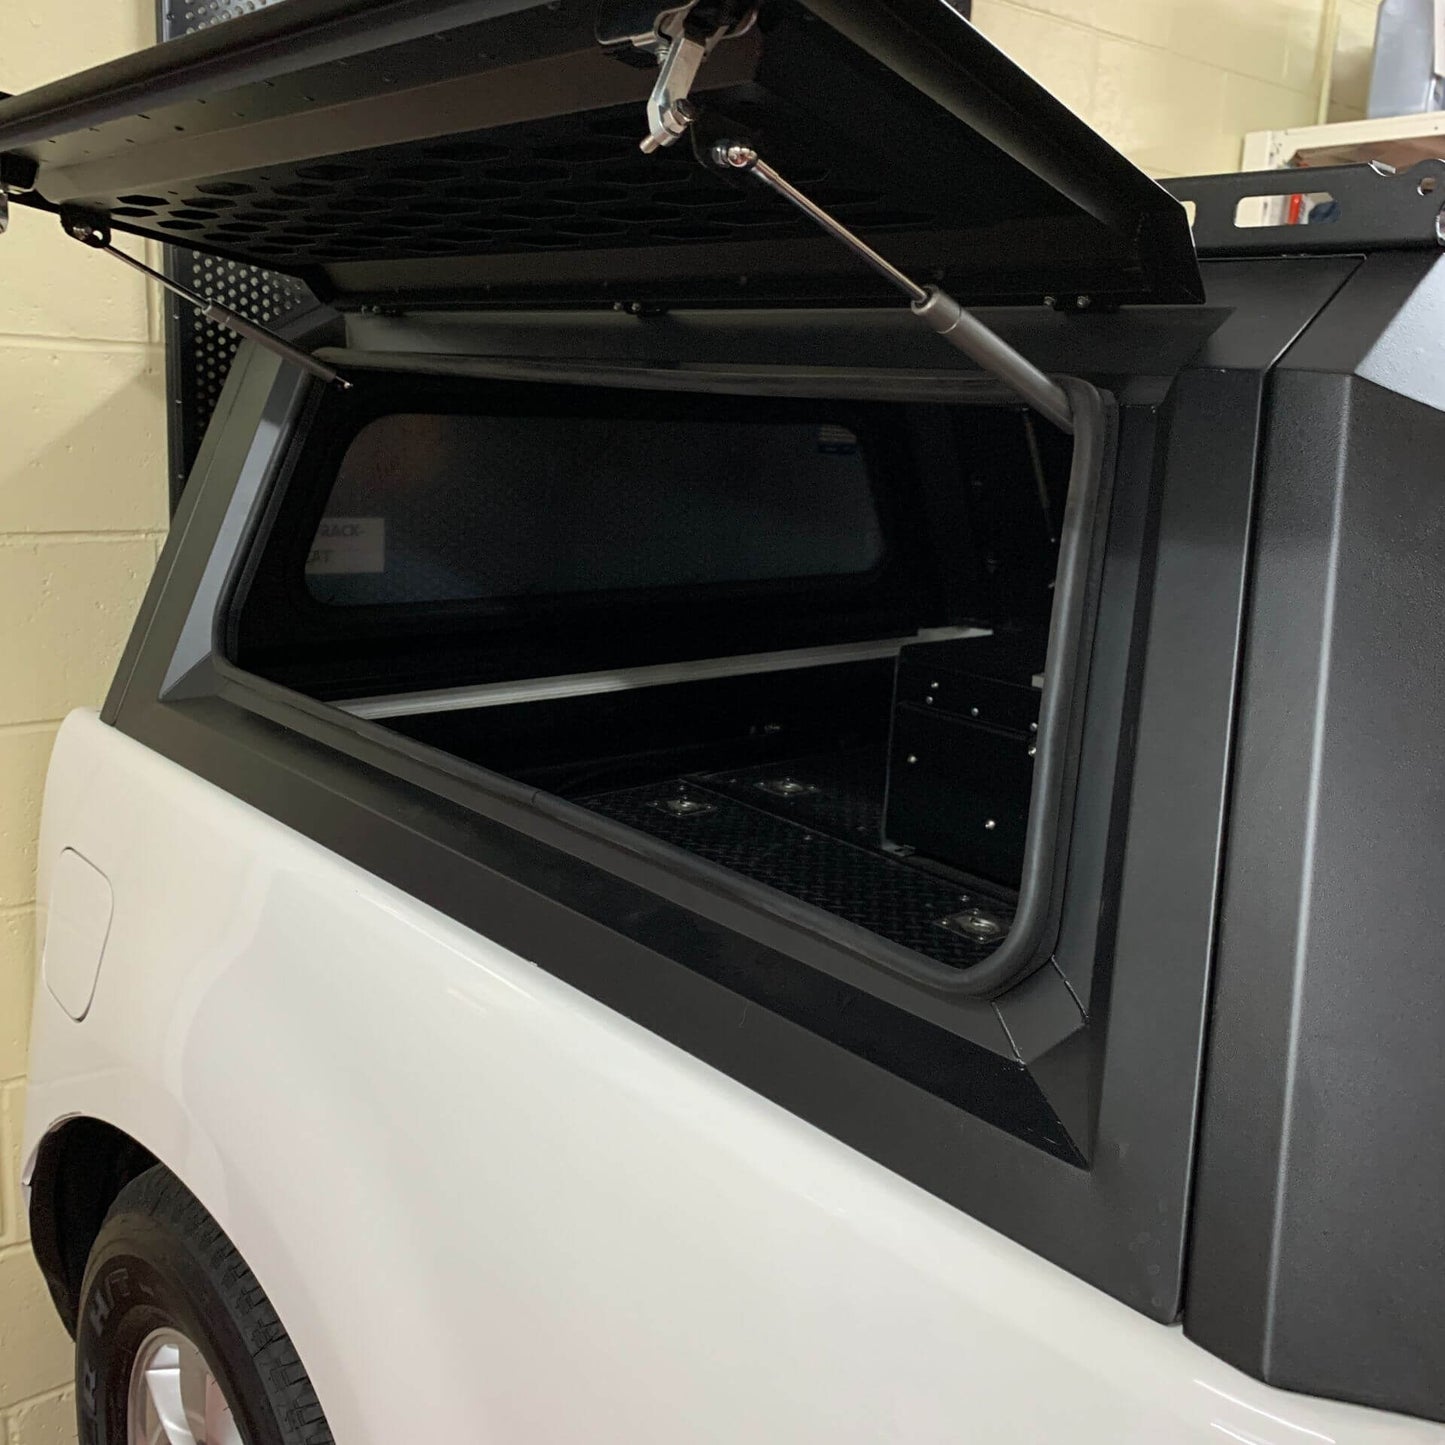 Aluminium Expedition Load Bed Canopy for the Toyota Hilux 2005-2016 Double Cab